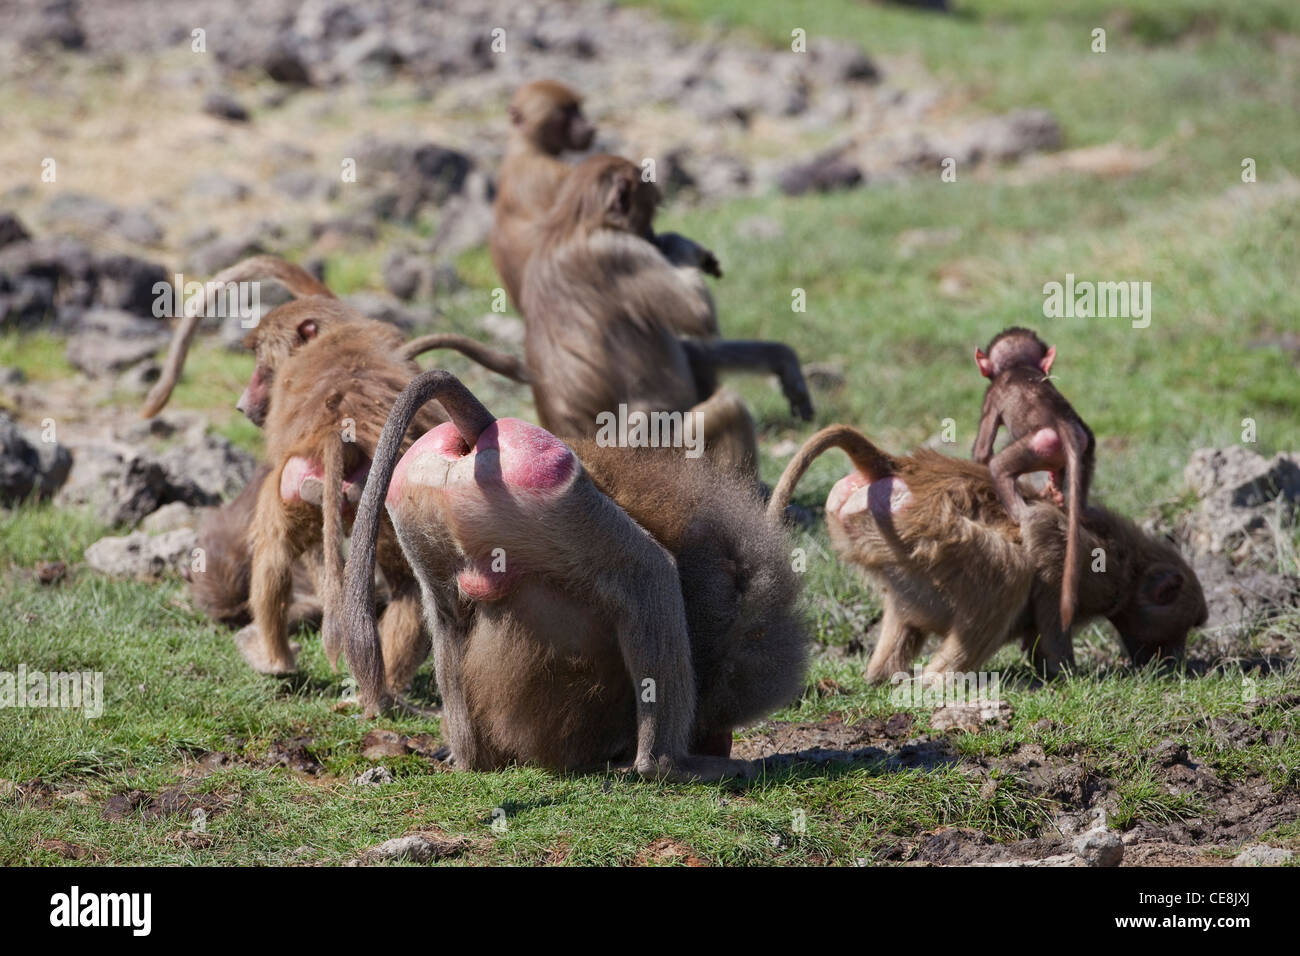 Hamadryas Baboons (Hamadryas papio). Drinking from water hole. All ages, adult male fore ground. Stock Photo